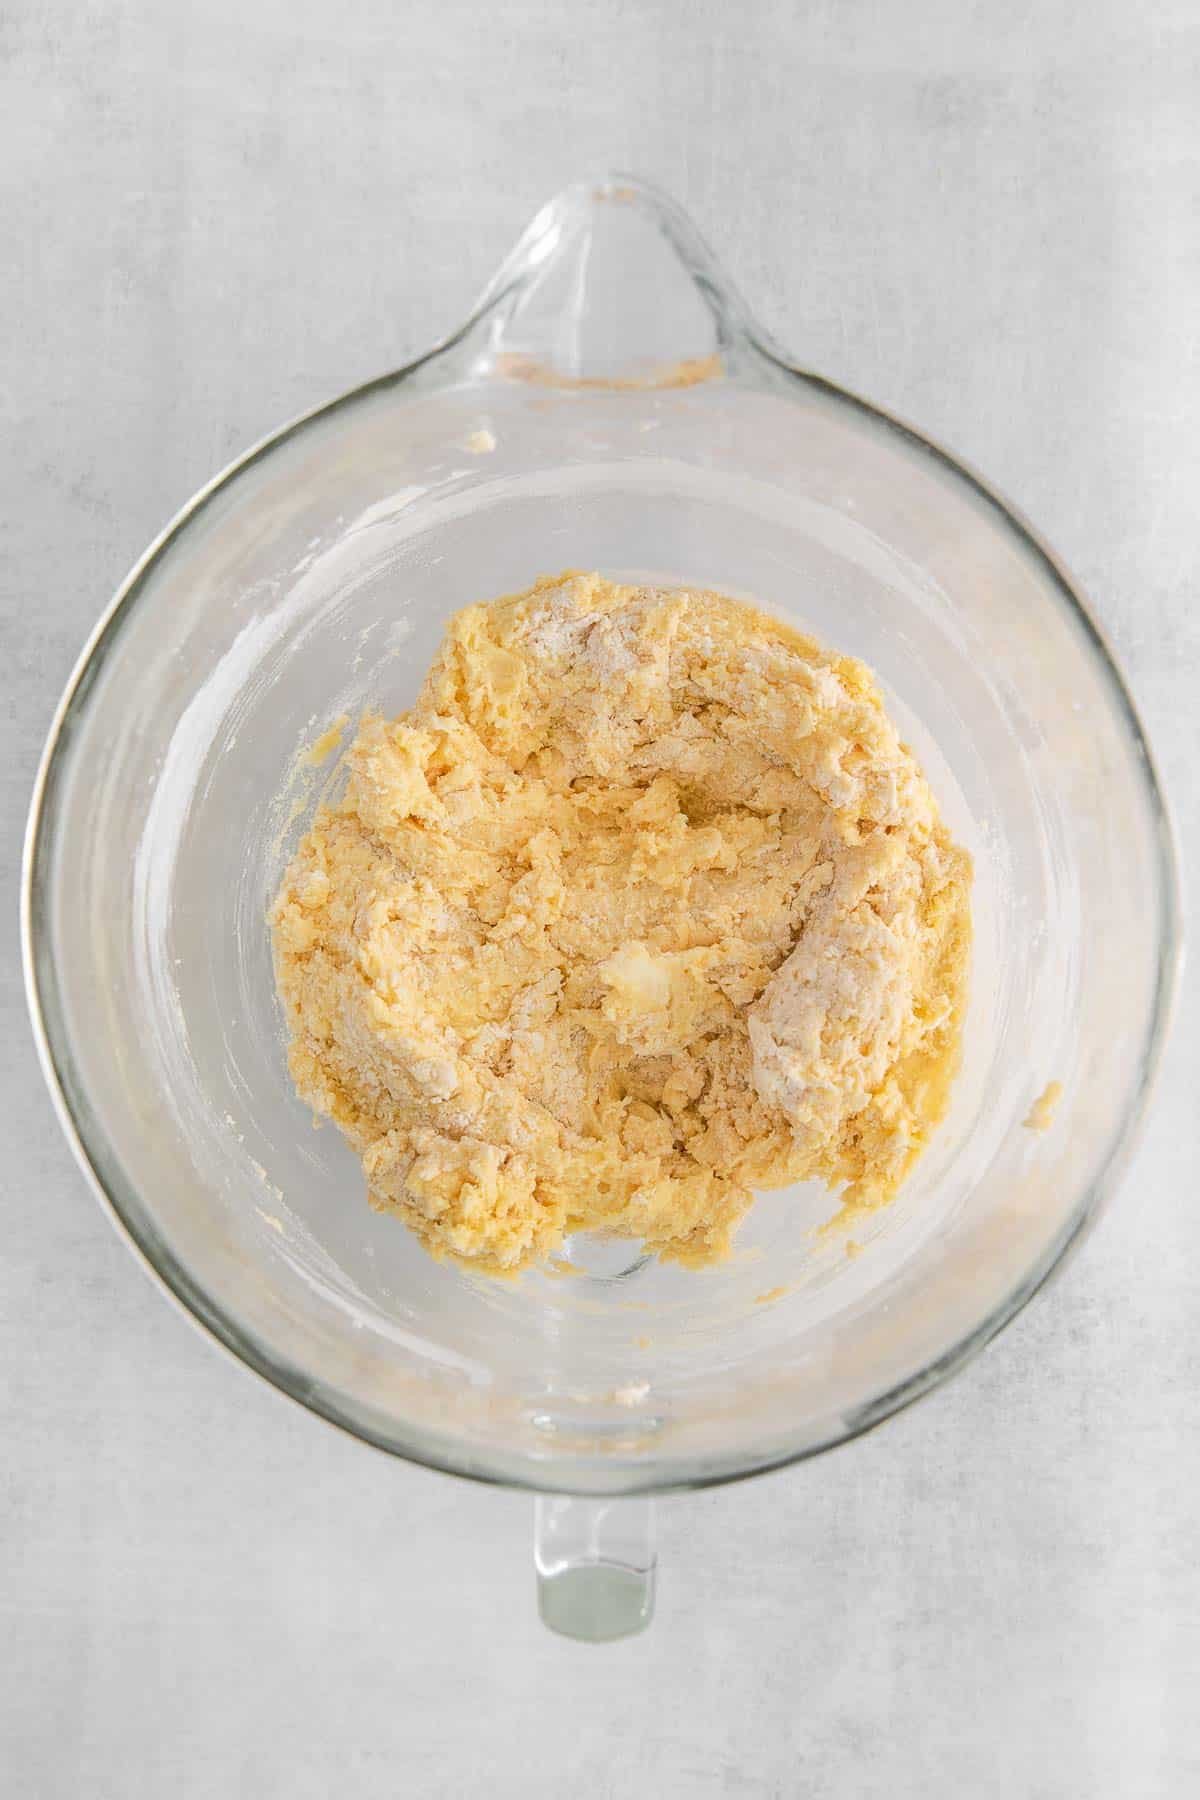 Flour added to mixture of butter, sugar, eggs and vanilla in a glass mixing bowl.